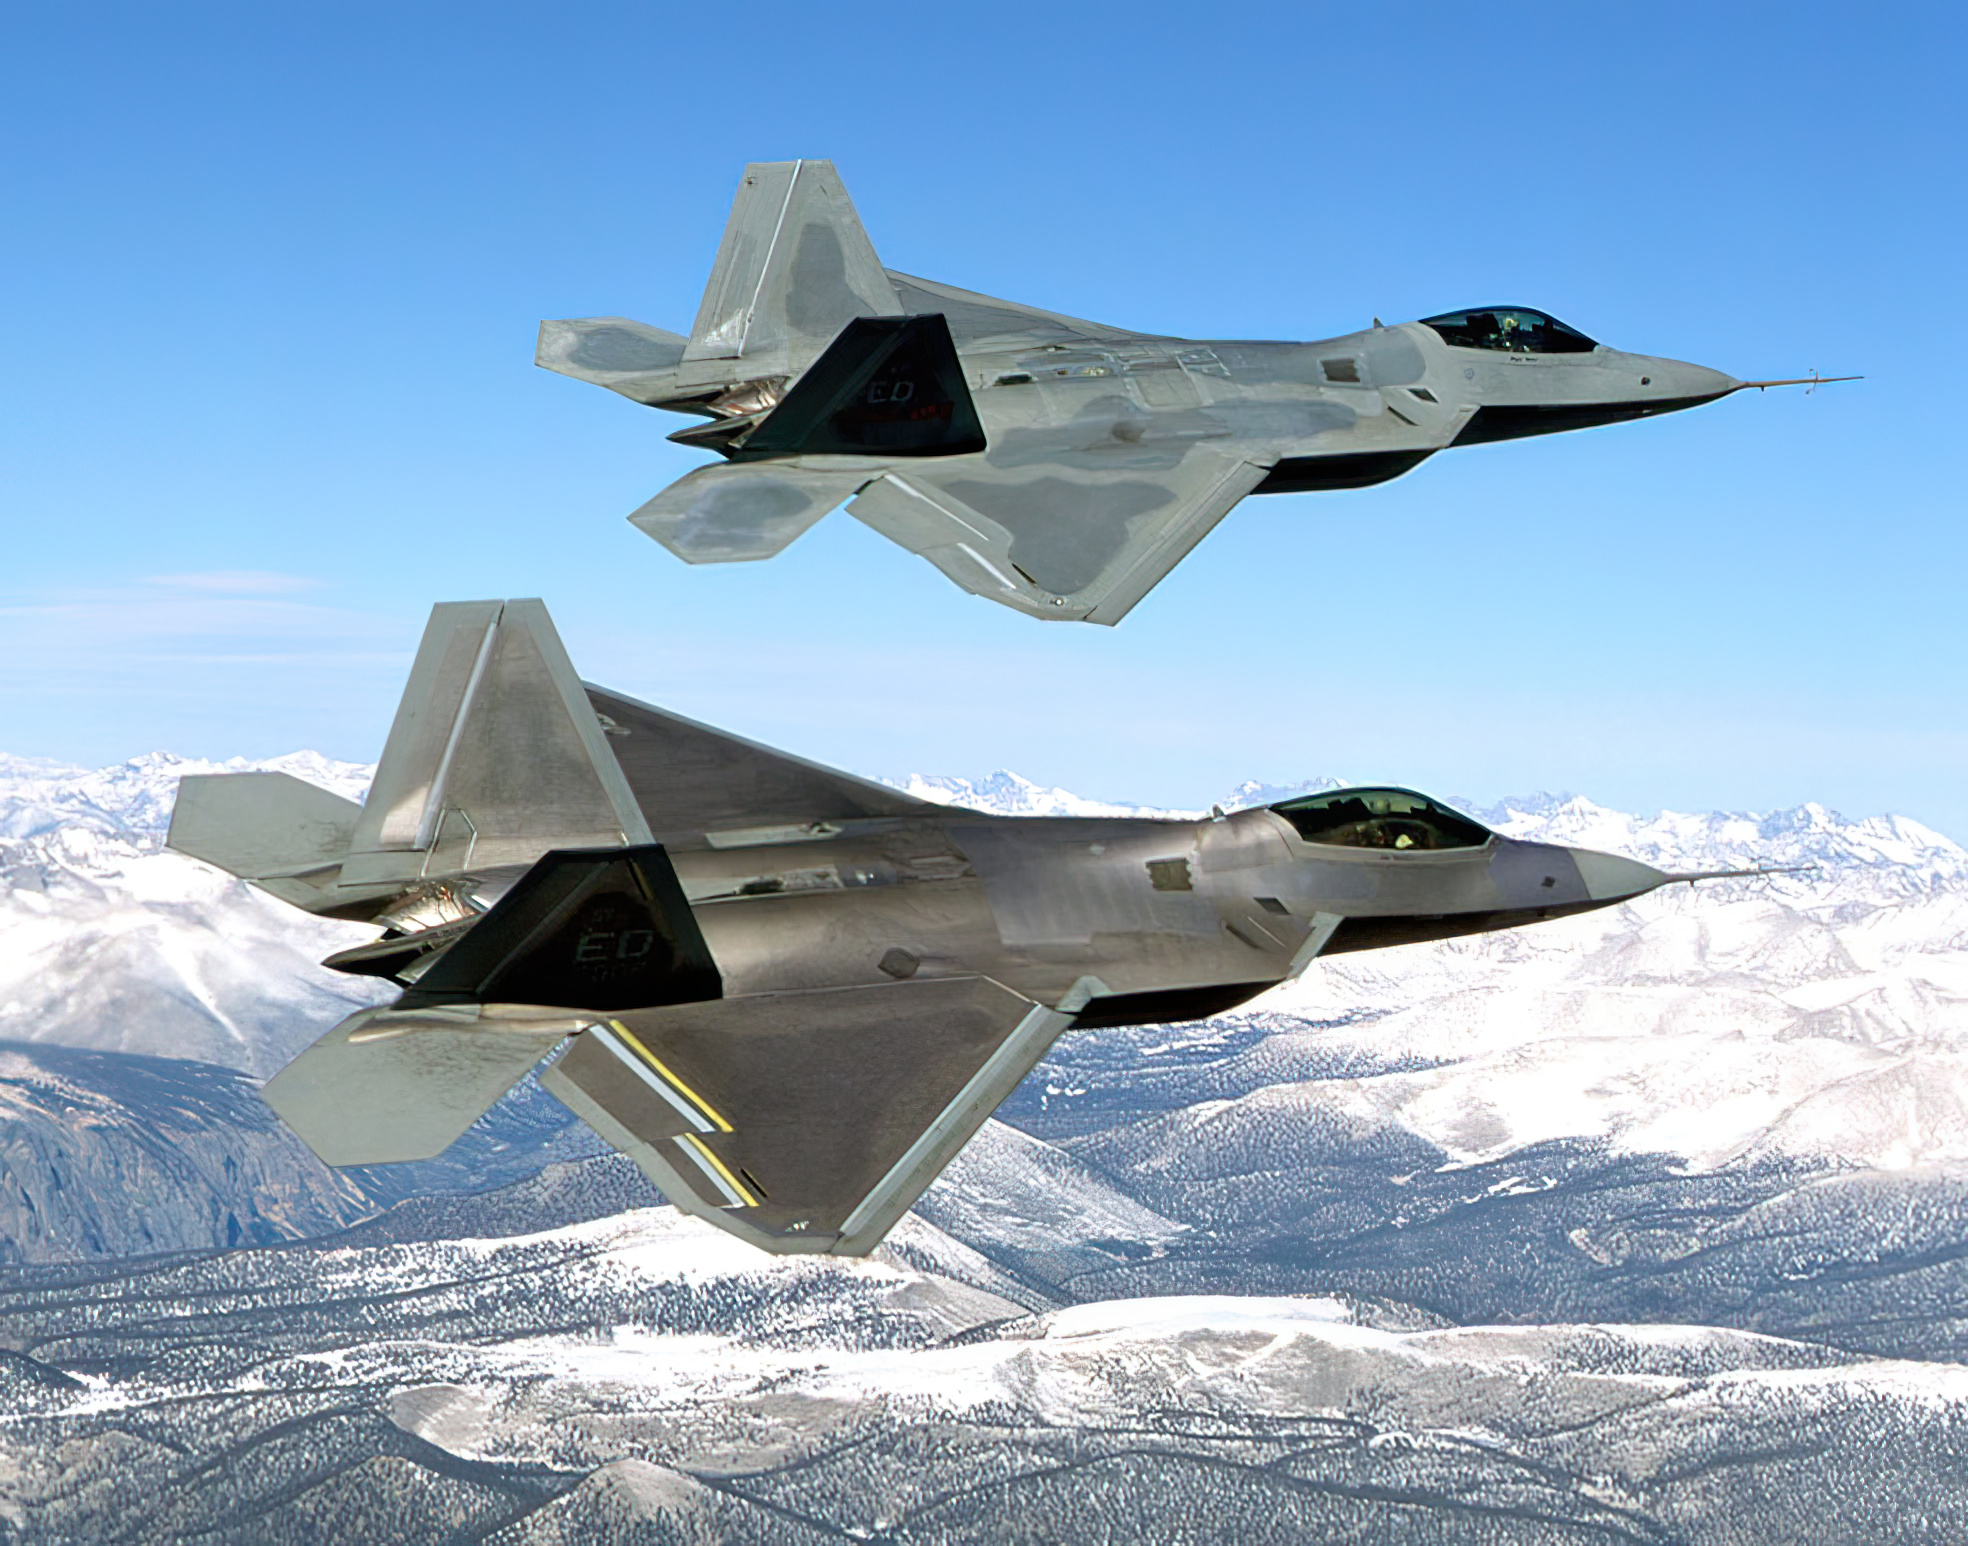 Two F-22s during flight testing, the upper one being the first EMD F-22, Raptor 4001